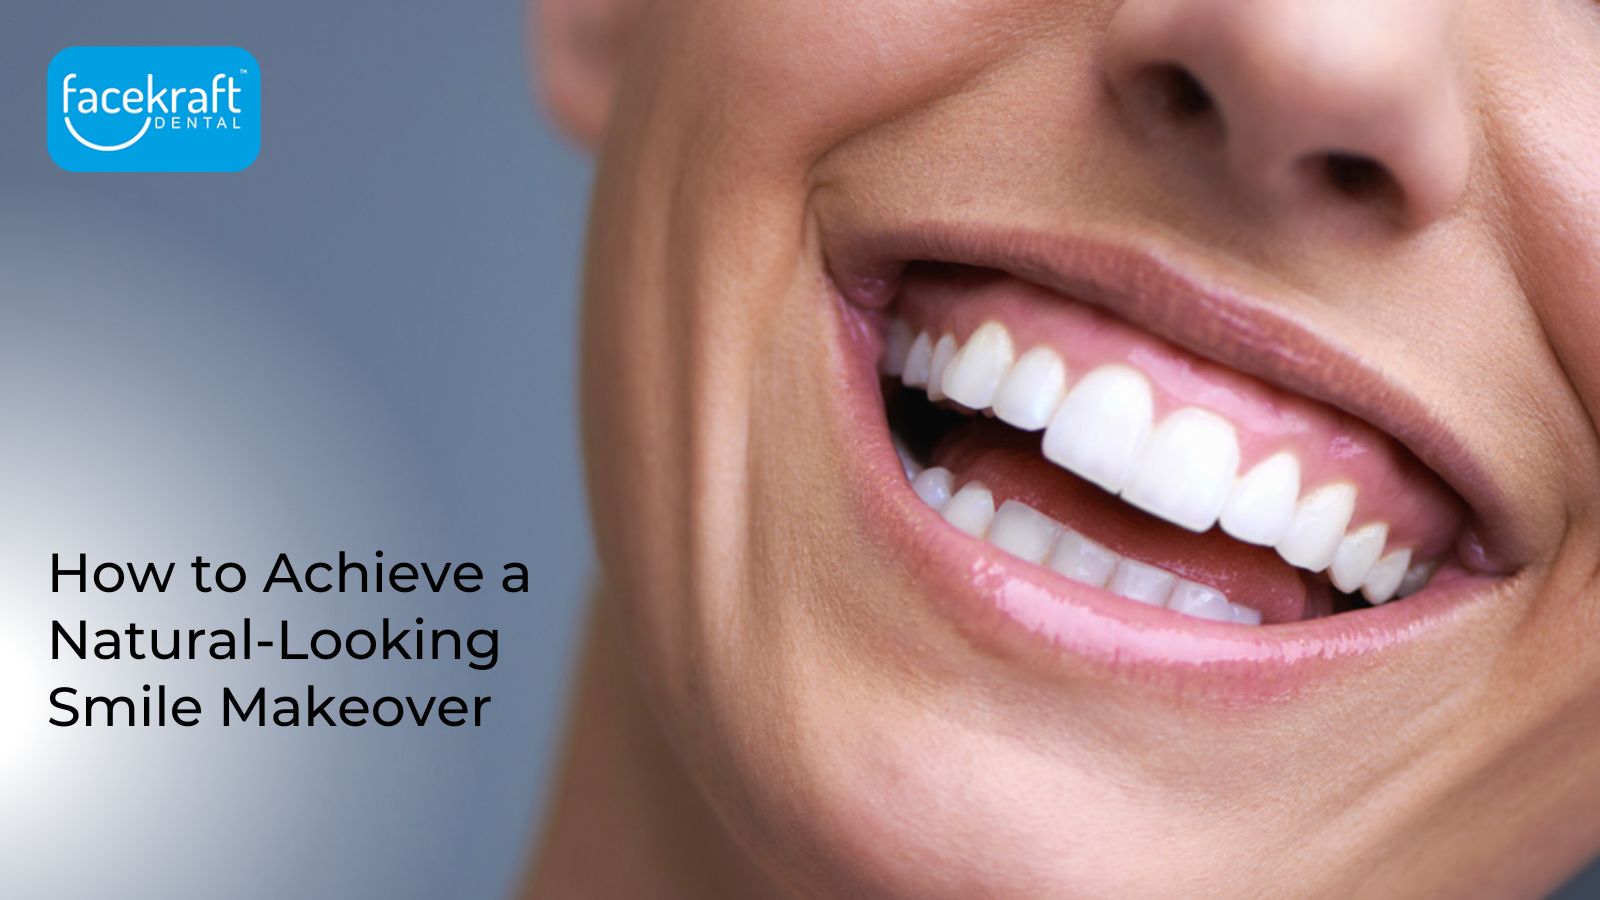 How to Achieve a Natural-Looking Smile Makeover